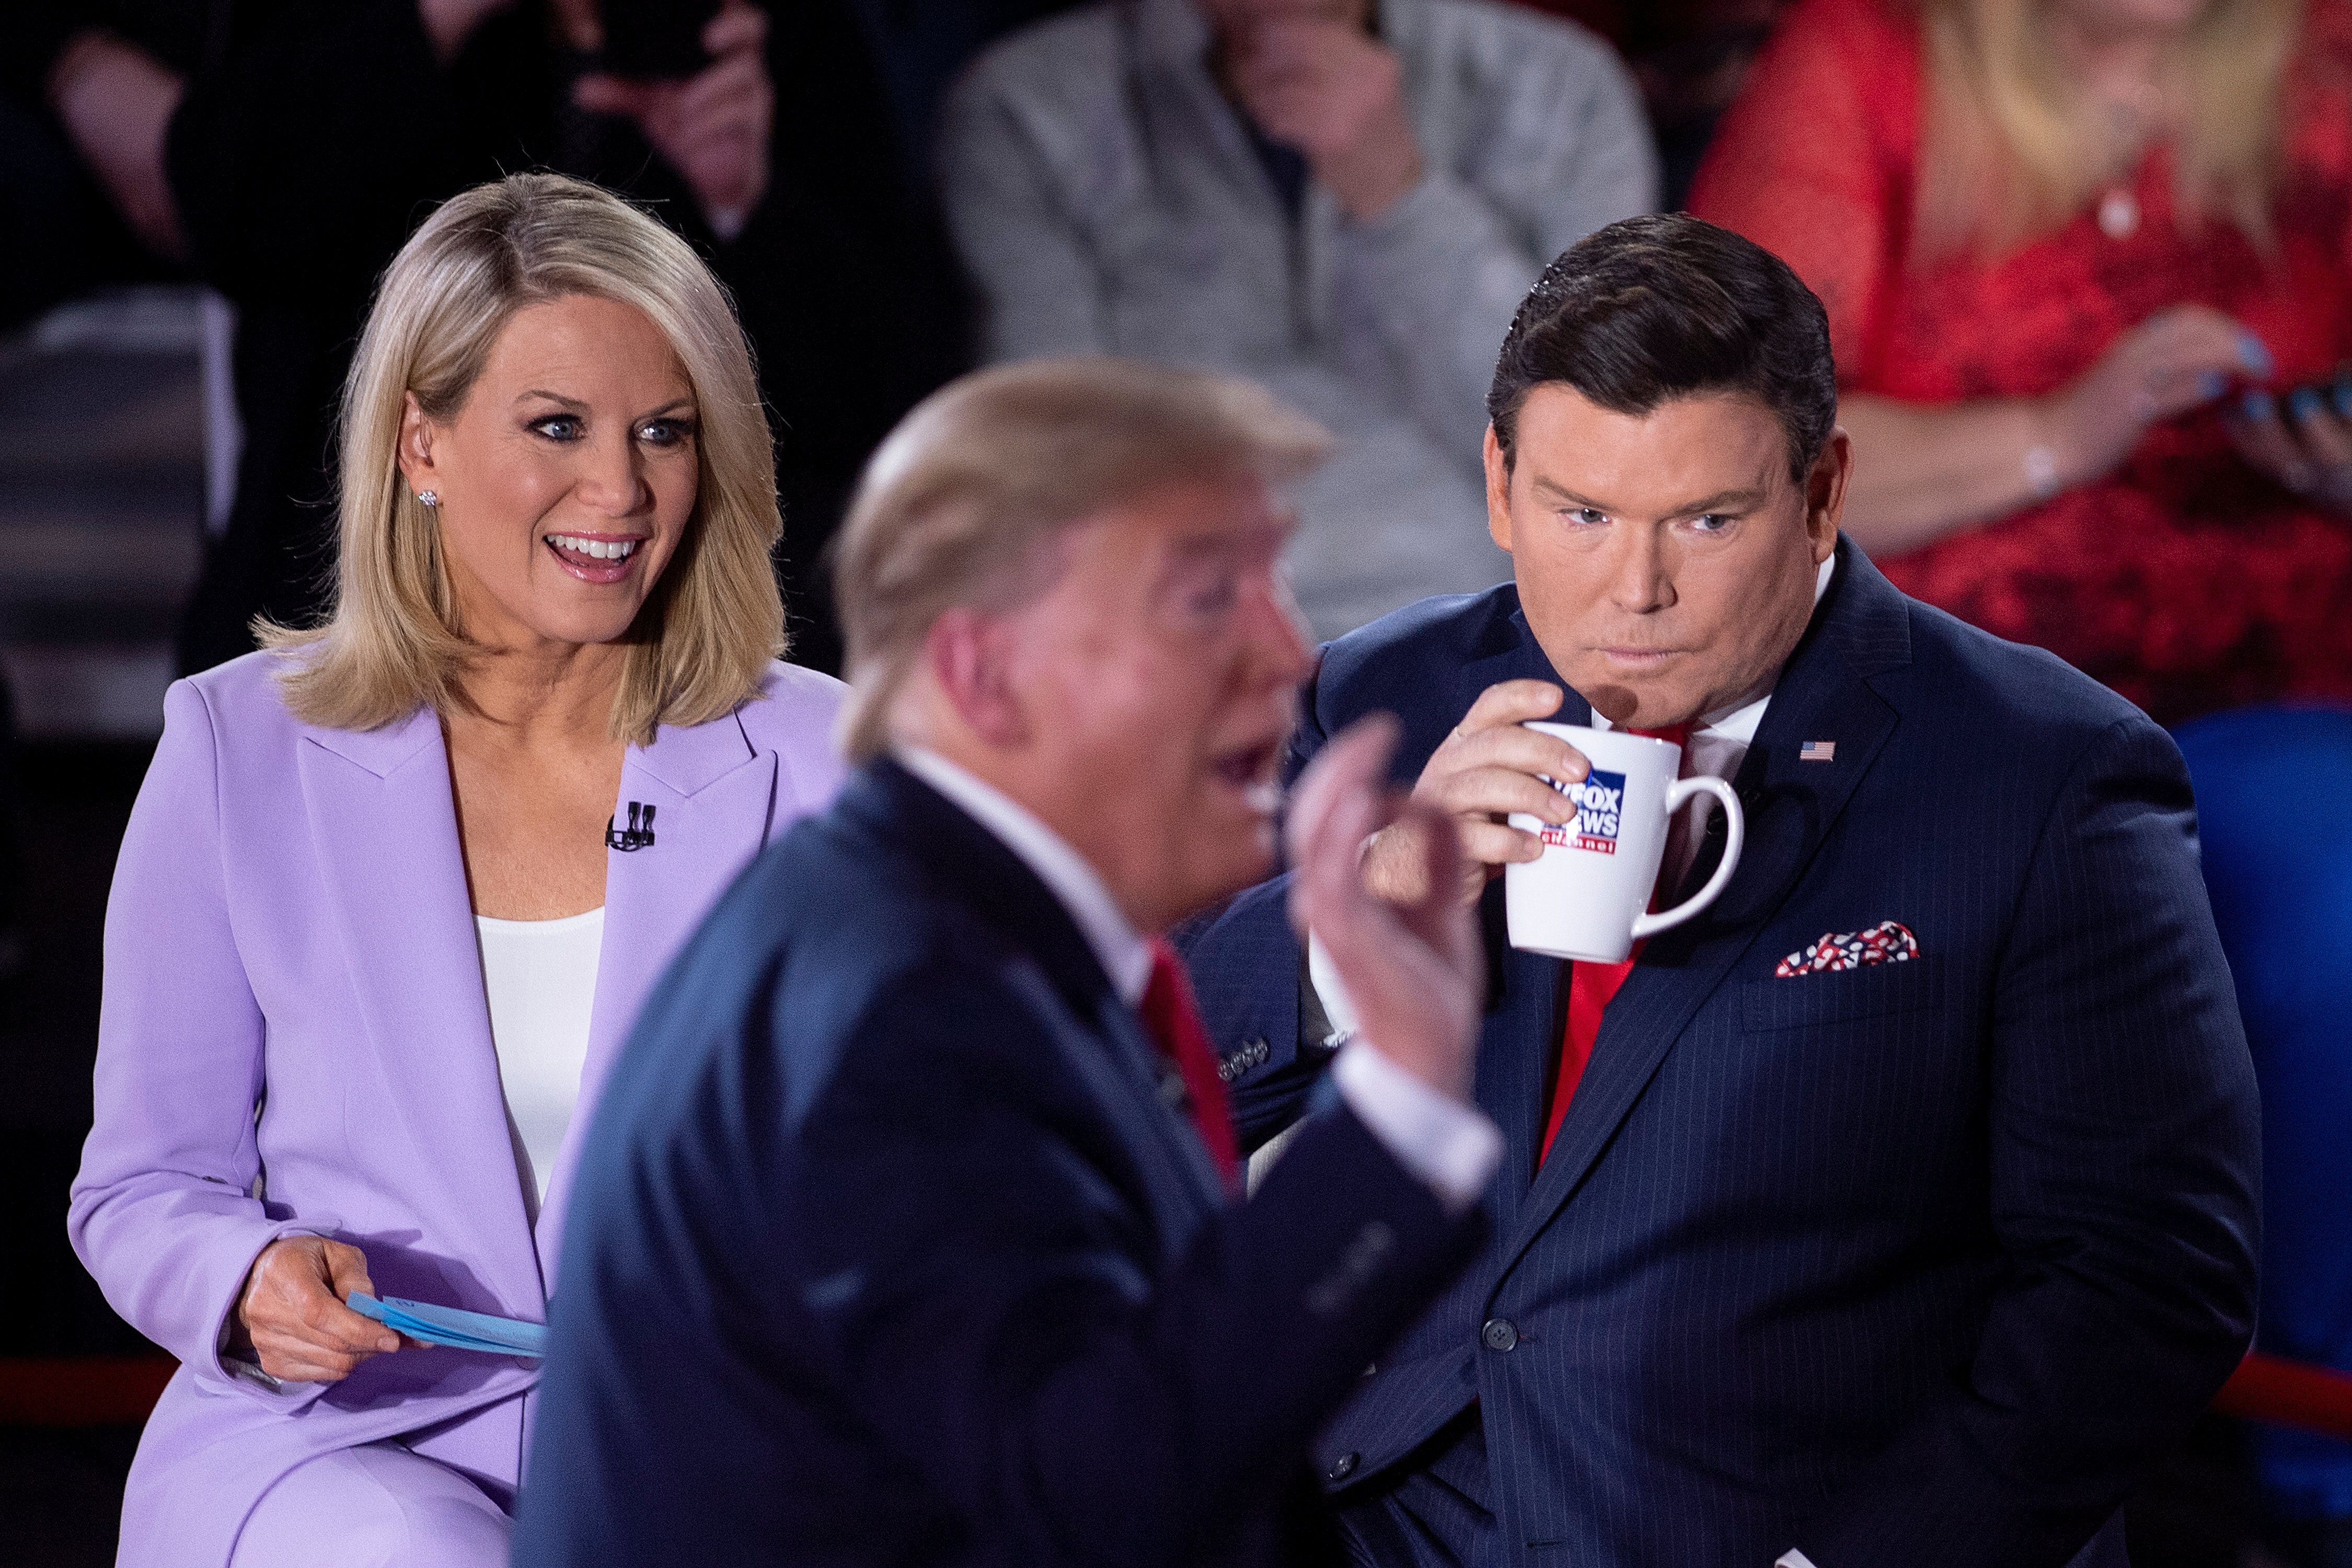 Fox News anchors Martha MacCallum and Bret Baier, pictured in March with Donald Trump, have been asked to quarantine, accordi